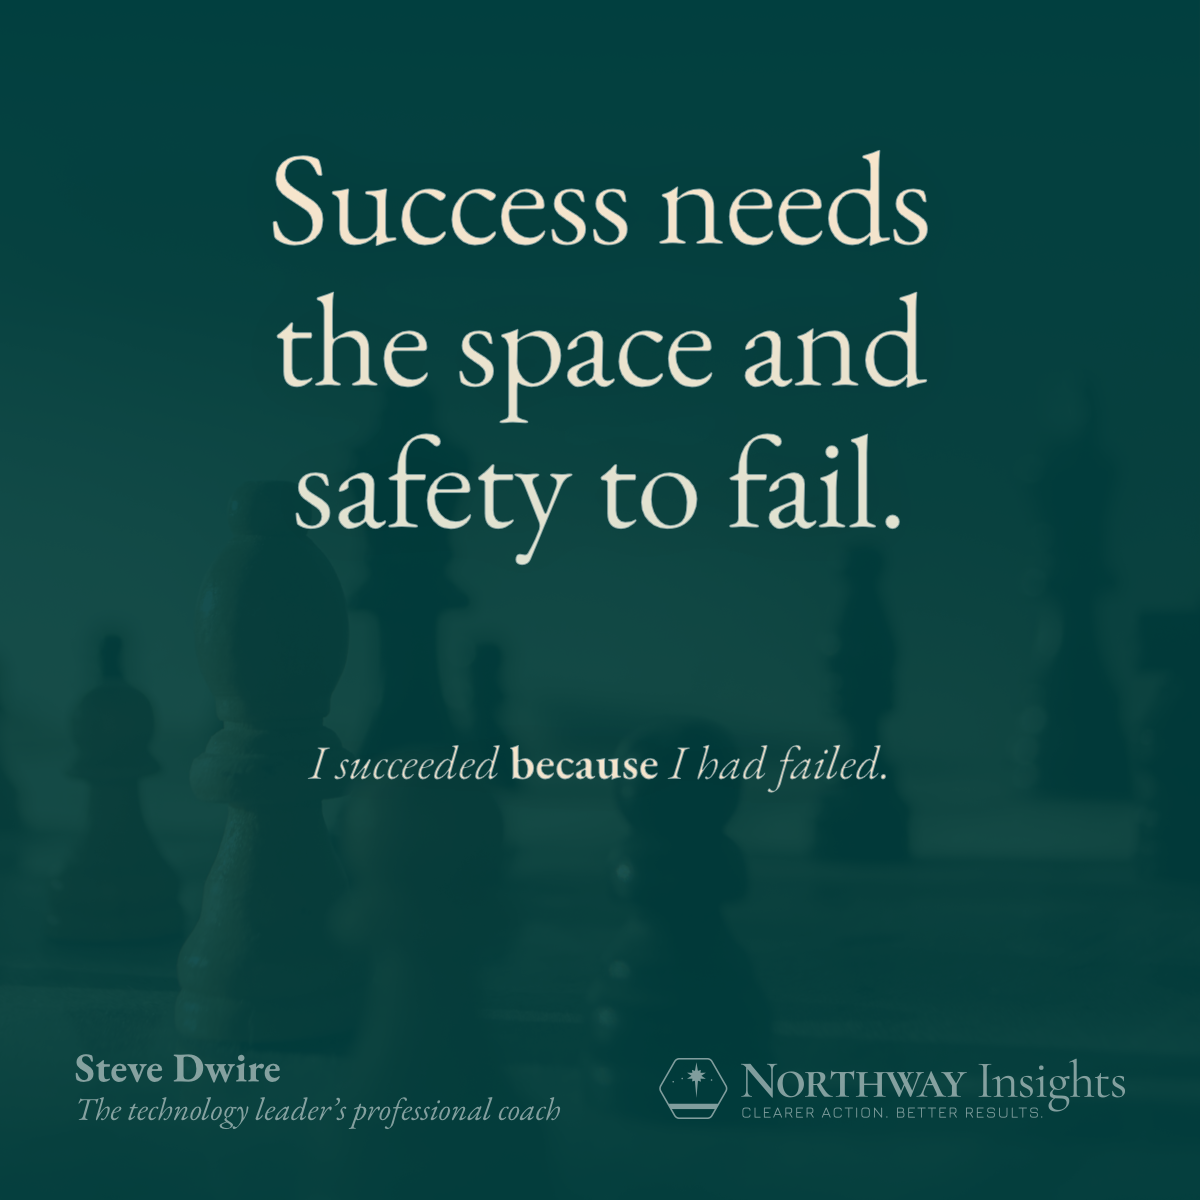 Success needs the space and safety to fail